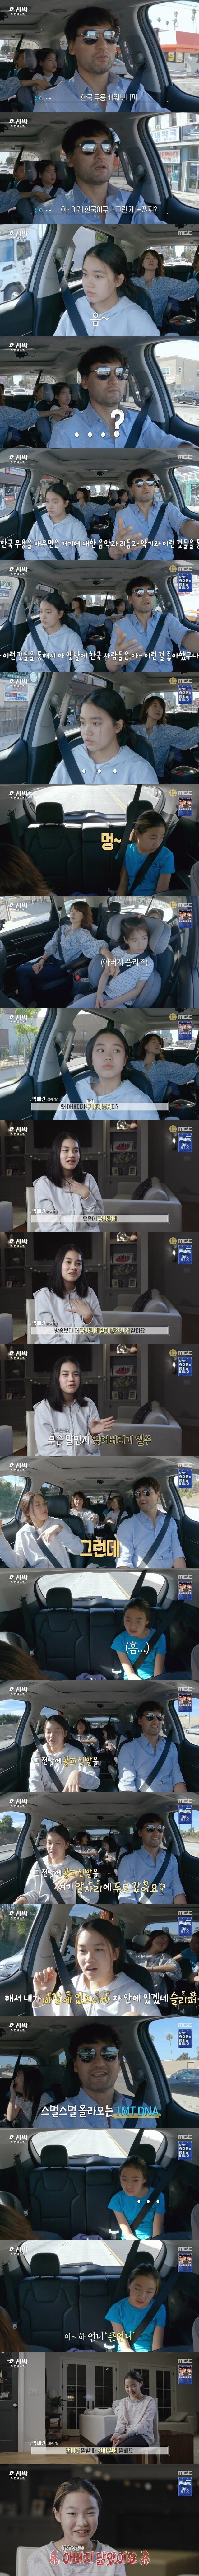 Park Chan-ho, the eldest daughter who dissed her father...jpg